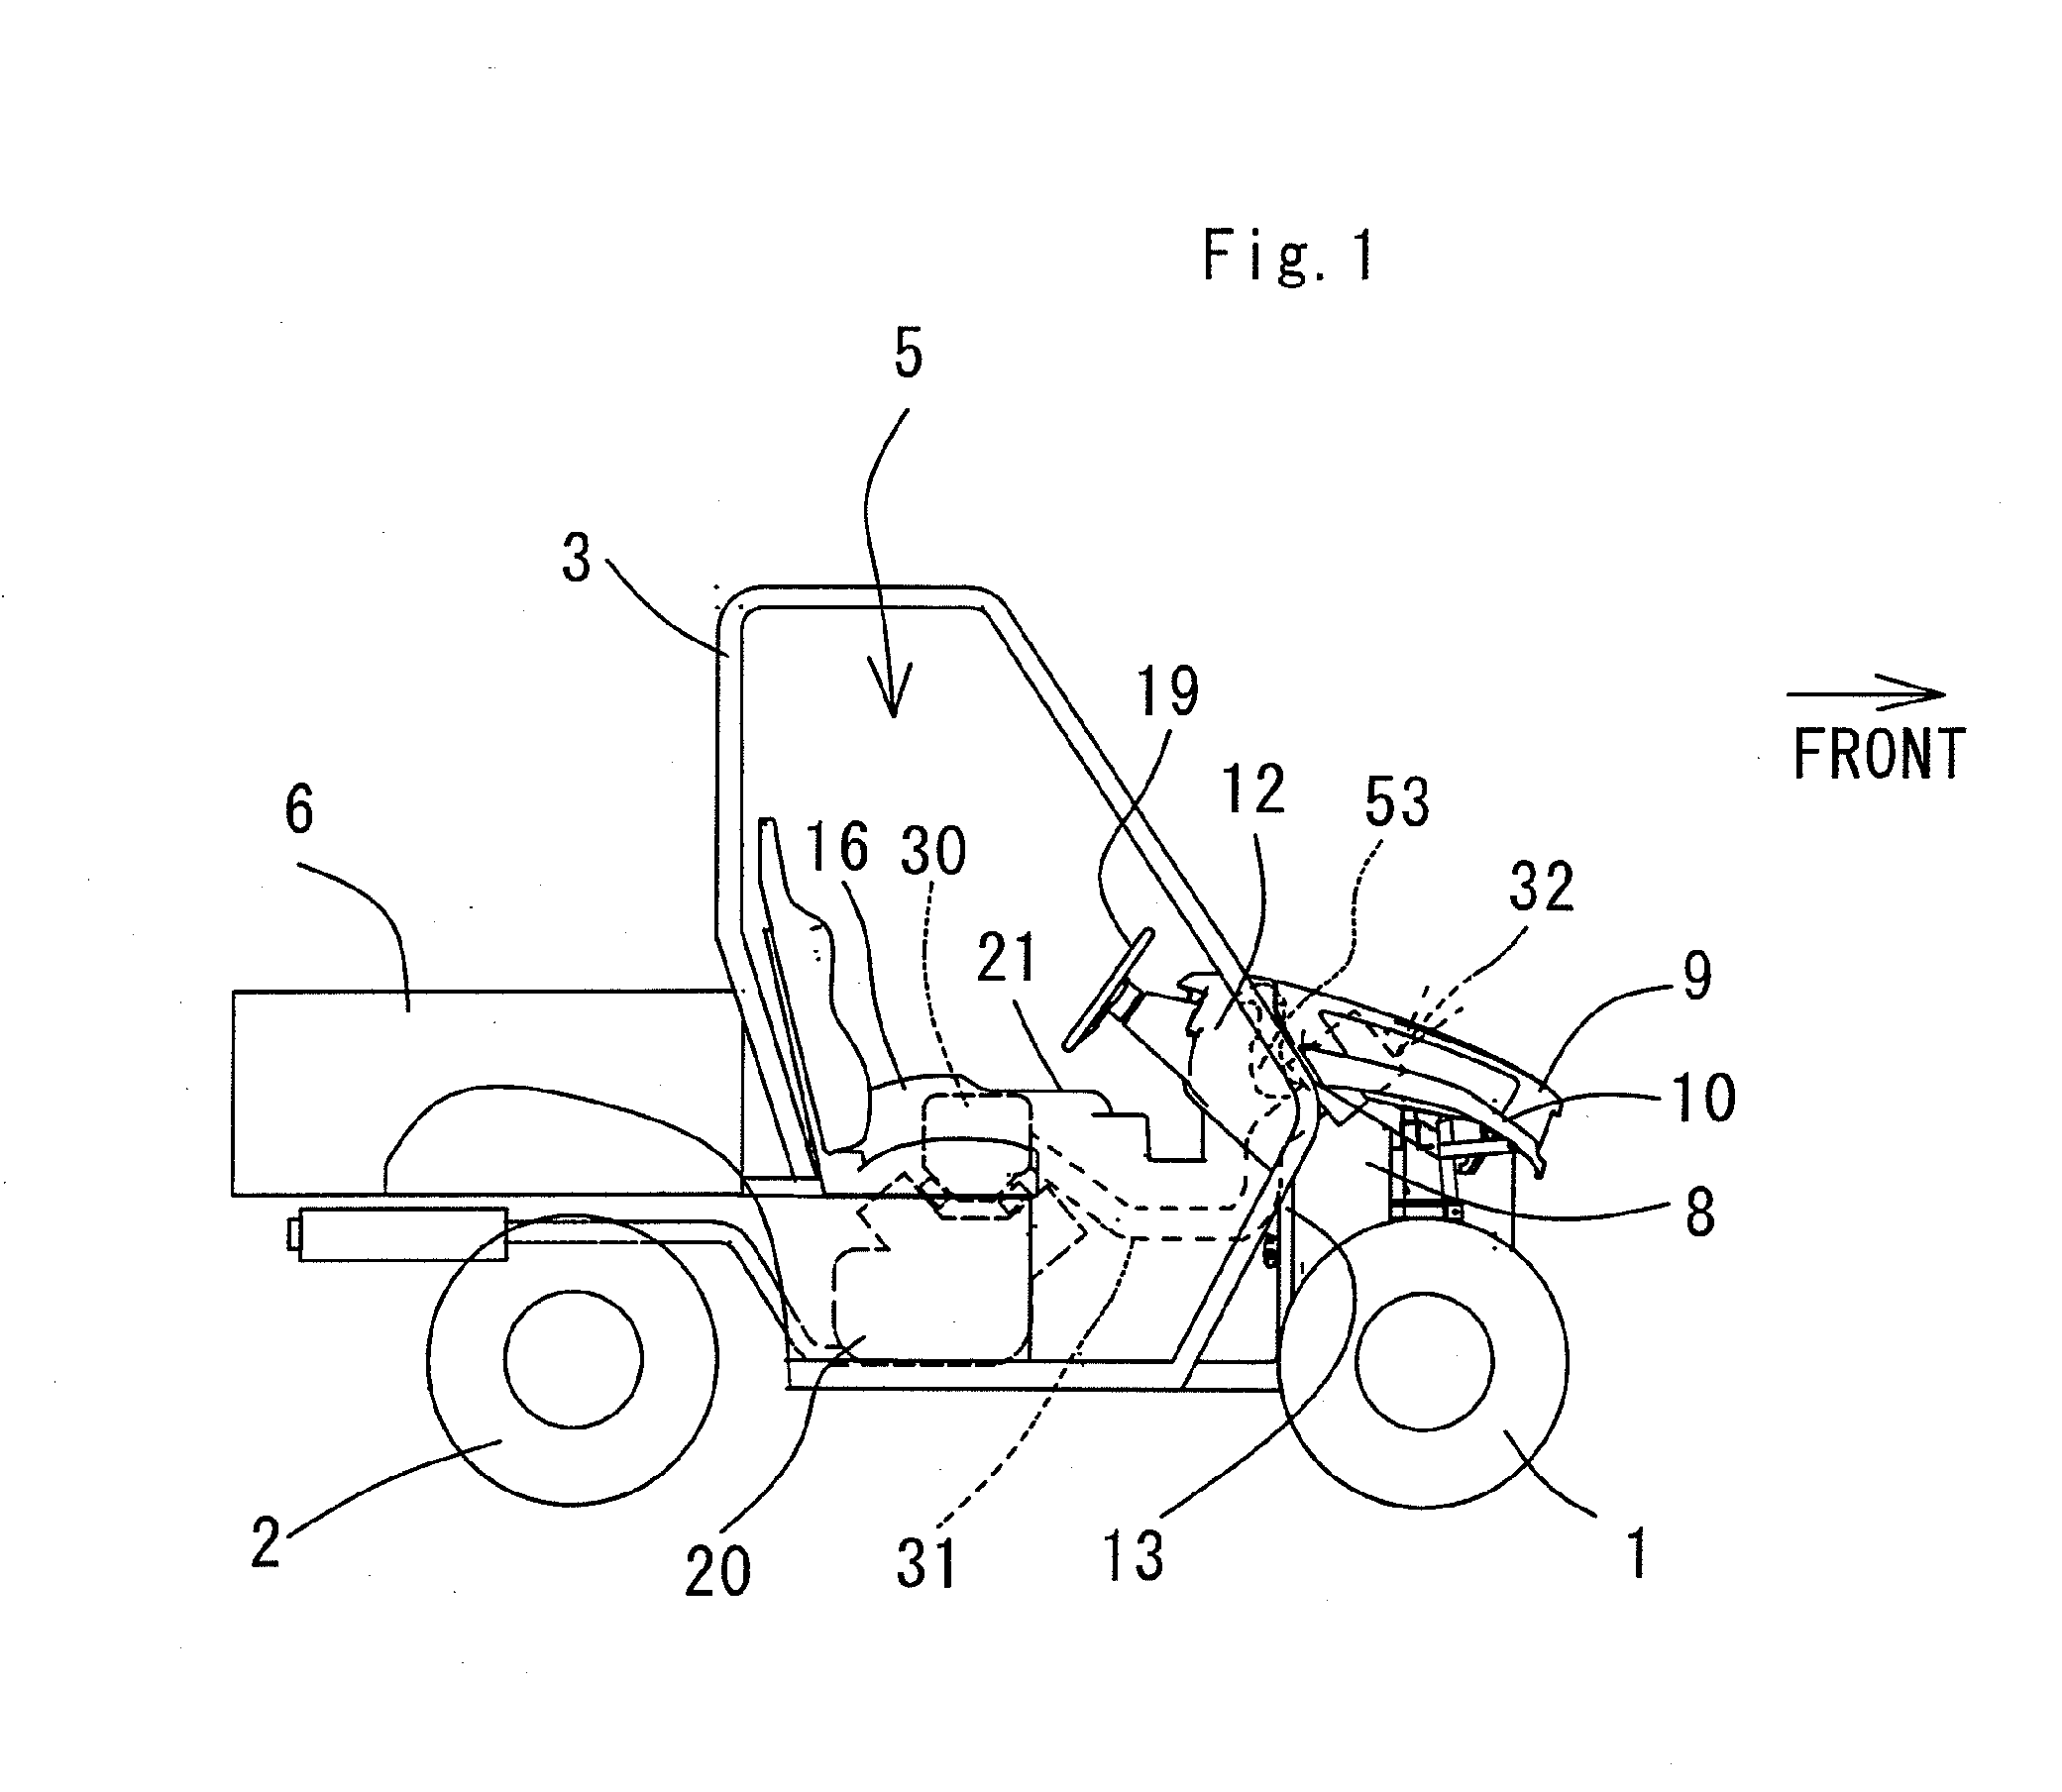 Utility vehicle with air-intake apparatus for engine